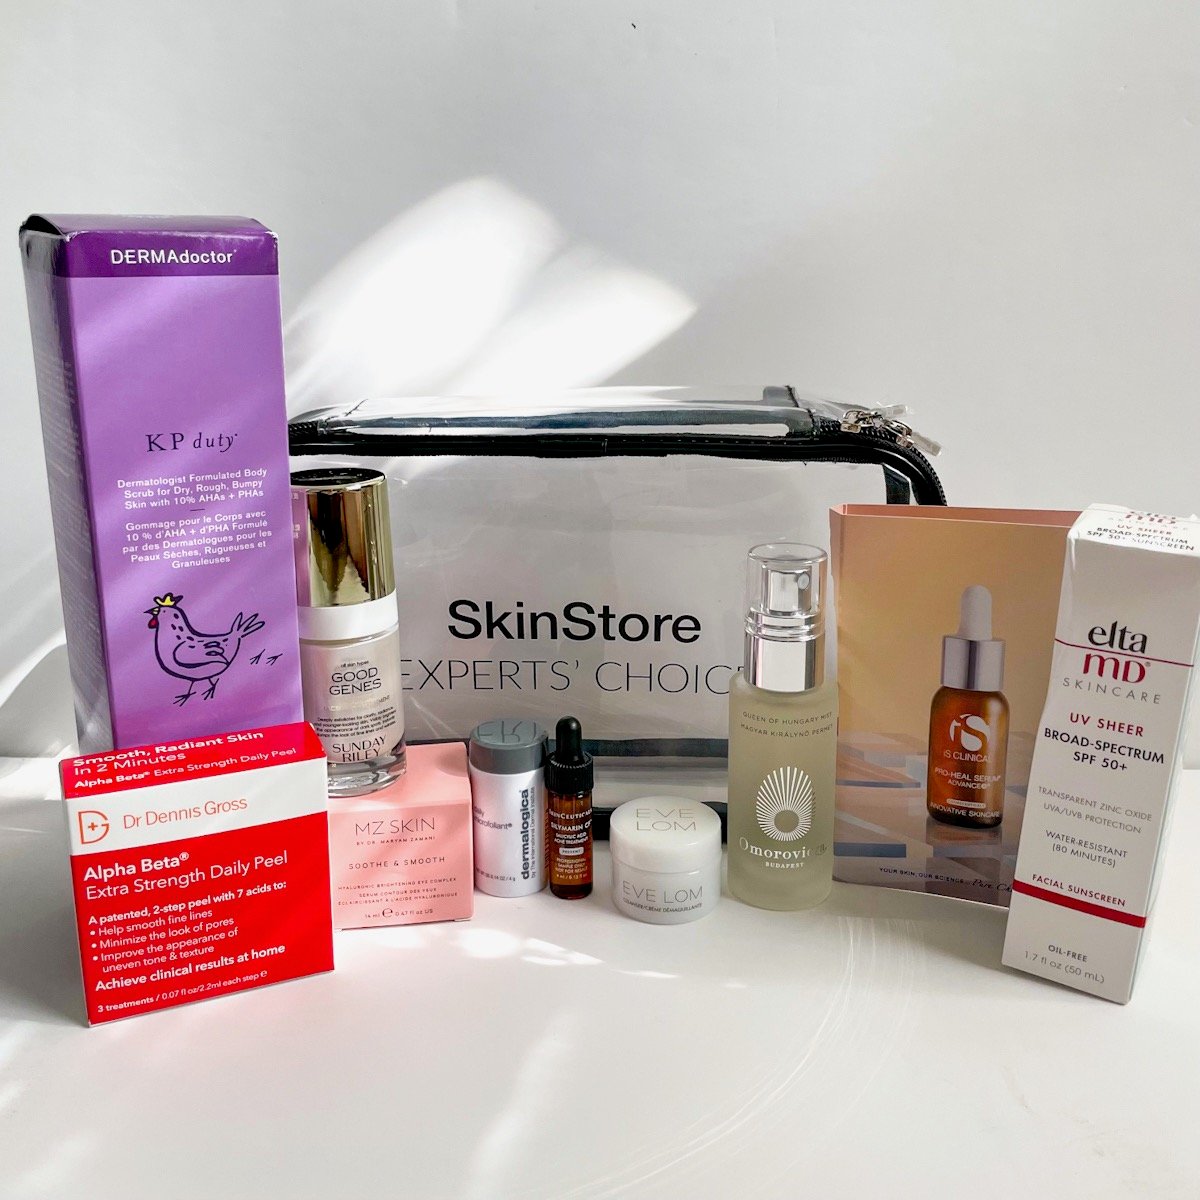 SkinStore “Expert’s Choice” Limited Edition Box Review